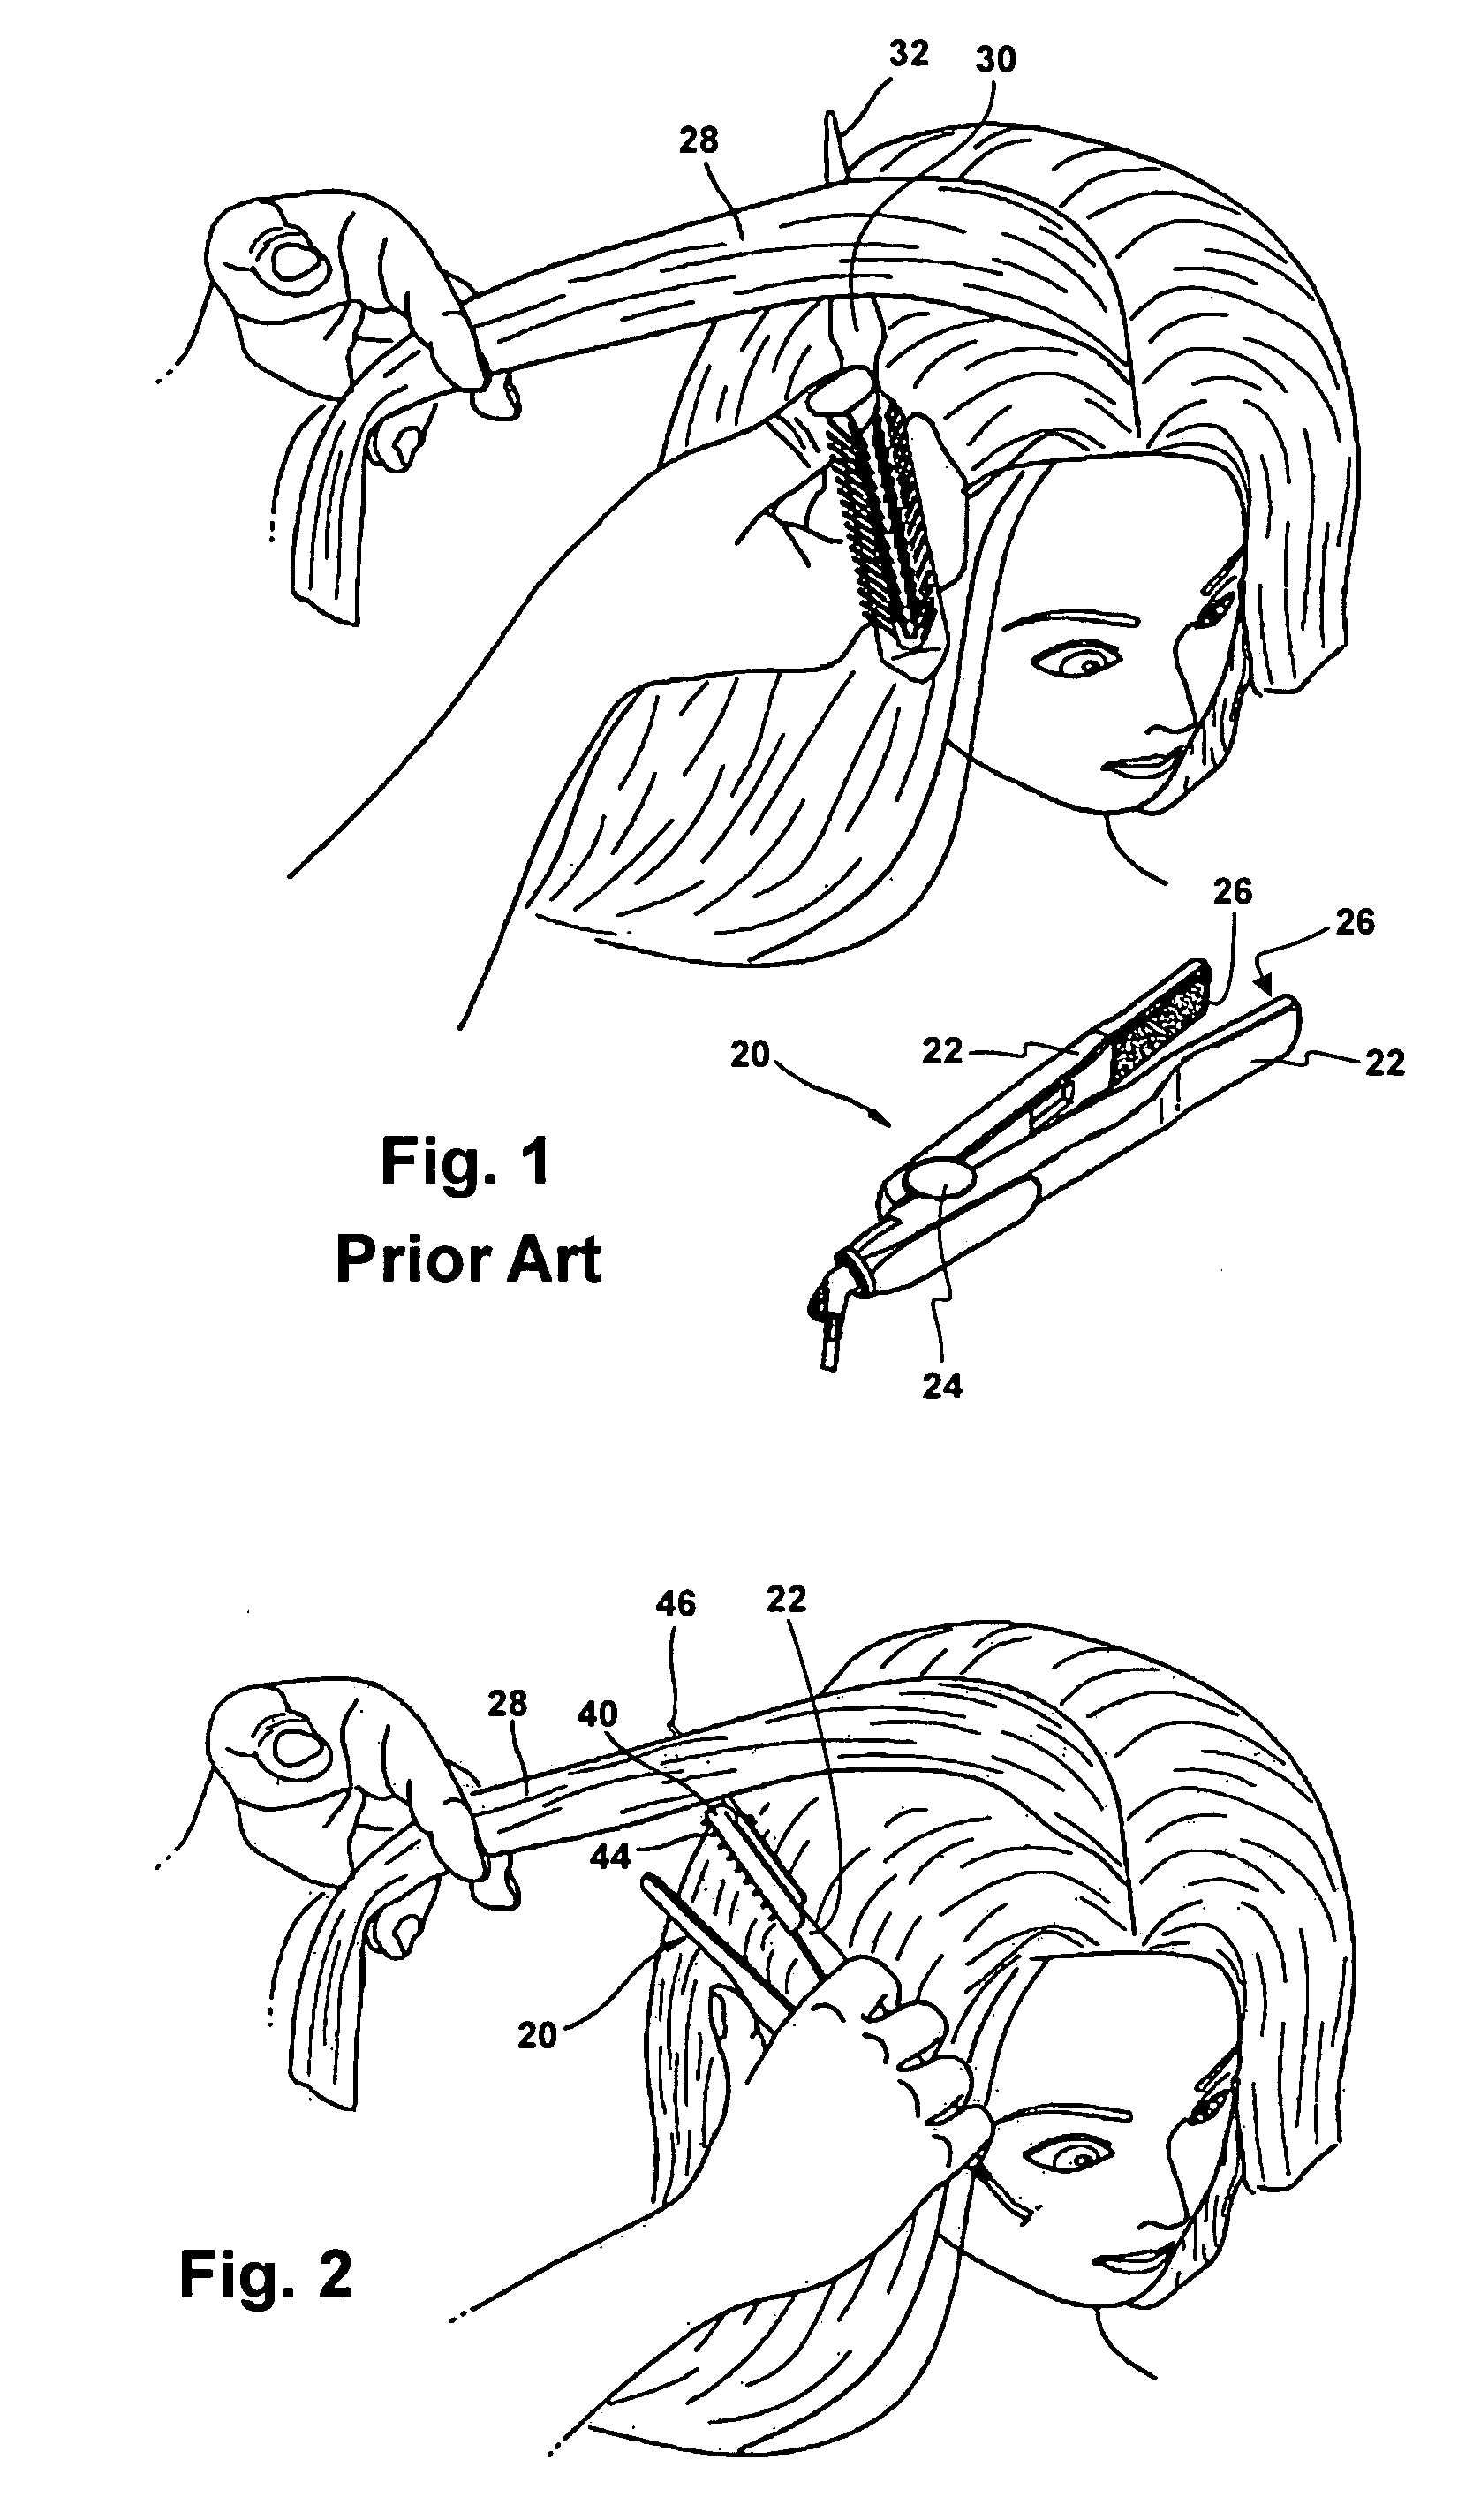 Hair styling iron having a pick and comb